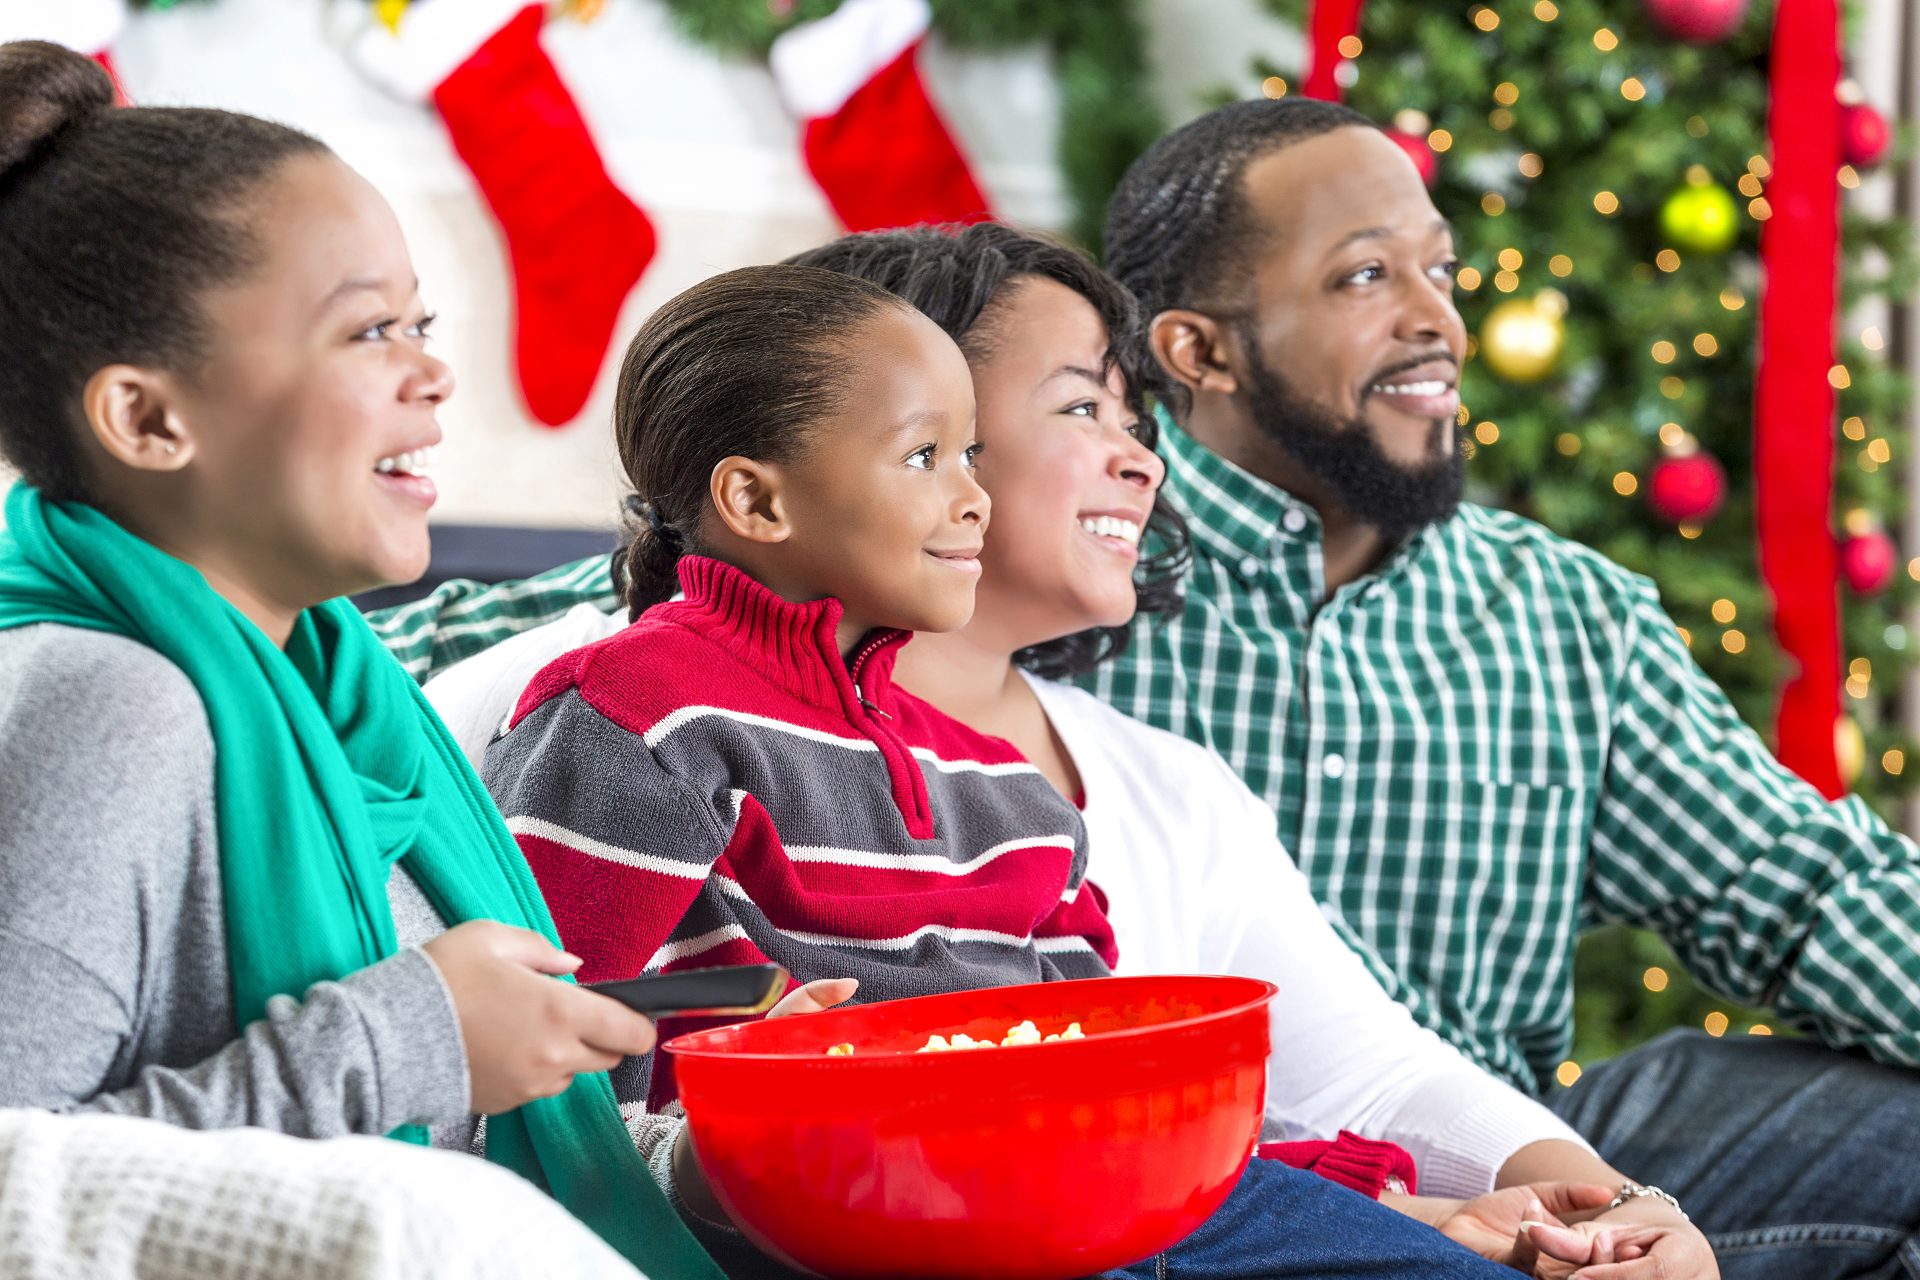 15 Christmas movies especially selected for families